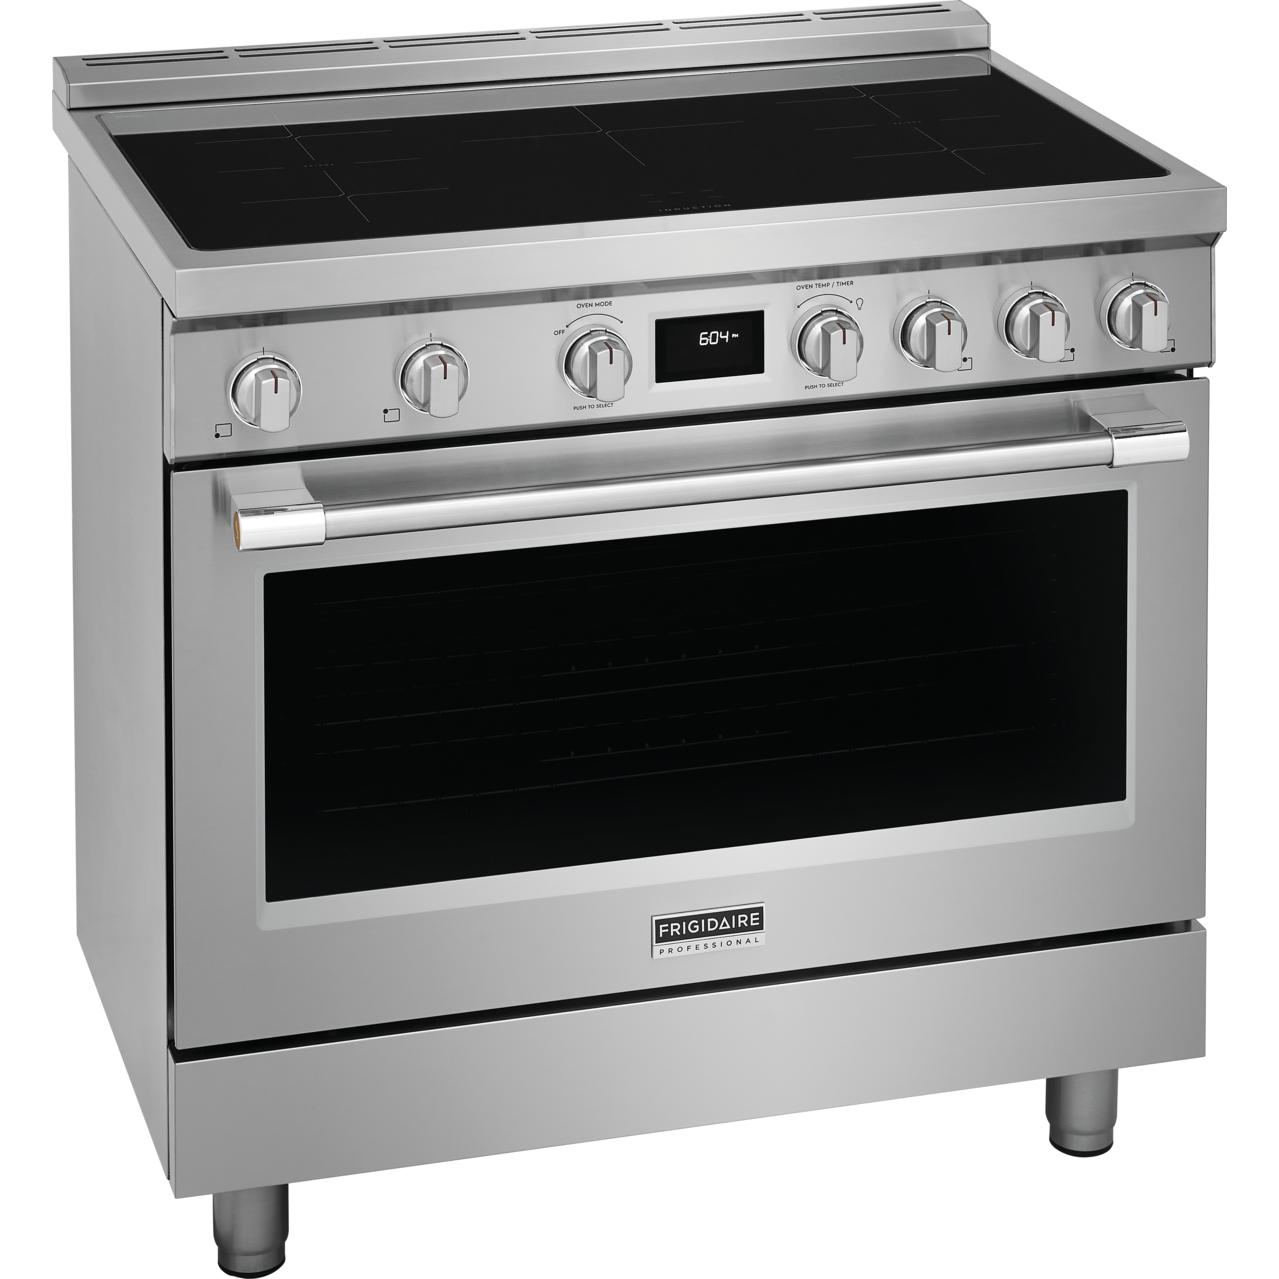 Frigidaire Professional 36-inch Freestanding Induction Range with Convection Technology PCFI3670AF